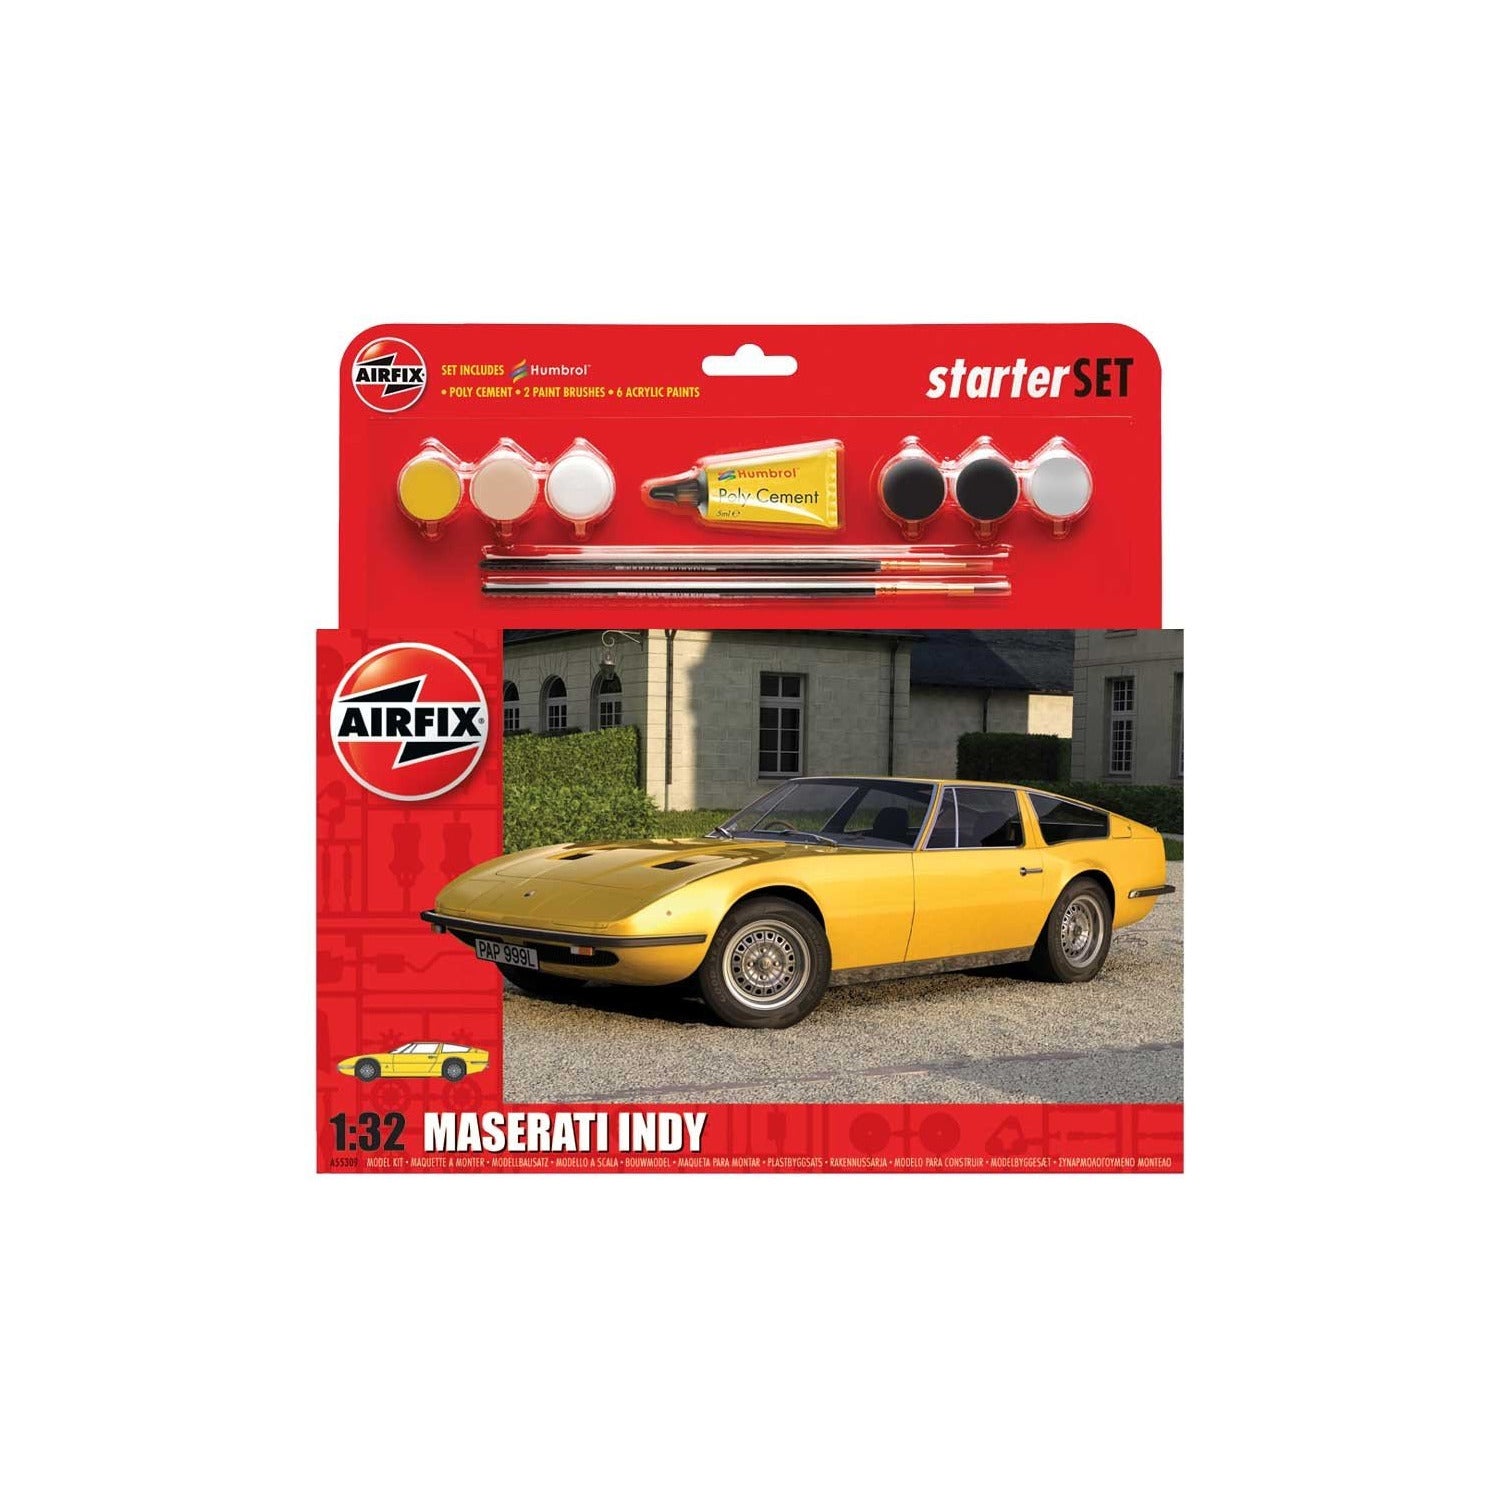 Maserati Indy 1/32 #A55309 by Airfix